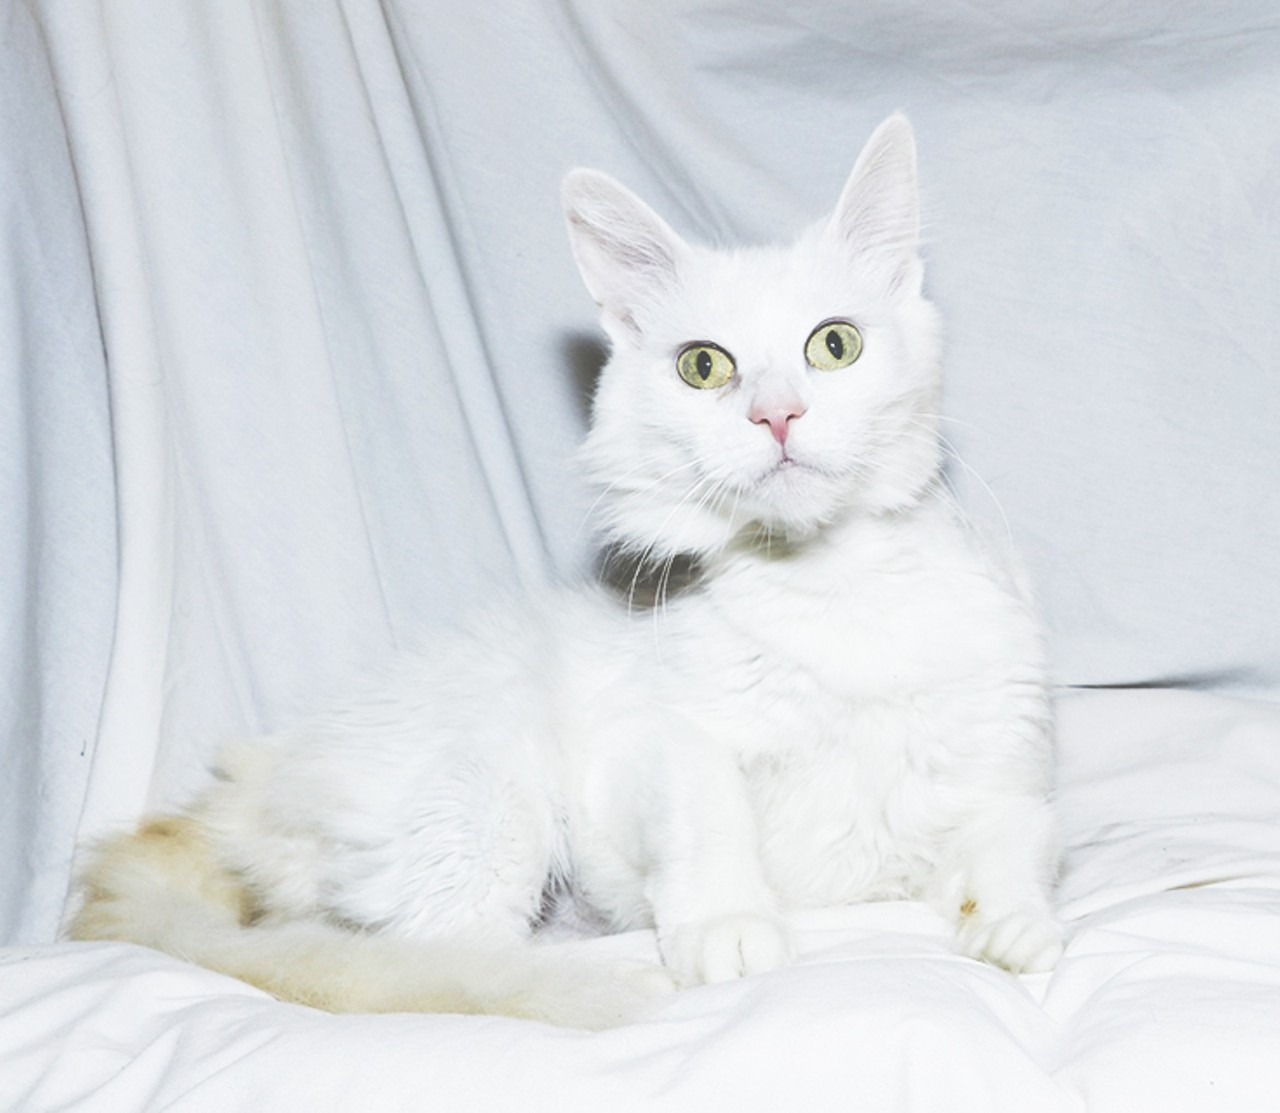 NAME: Fluffy
GENDER: Female
BREED: Domestic Medium Hair
AGE: 9 years, 1 month
WEIGHT: 7 pounds
SPECIAL CONSIDERATIONS: Prefers a home with no dogs
REASON I CAME TO MHS: Owner surrender
LOCATION: Rochester Hills Center for Animal Care
ID NUMBER: 865992